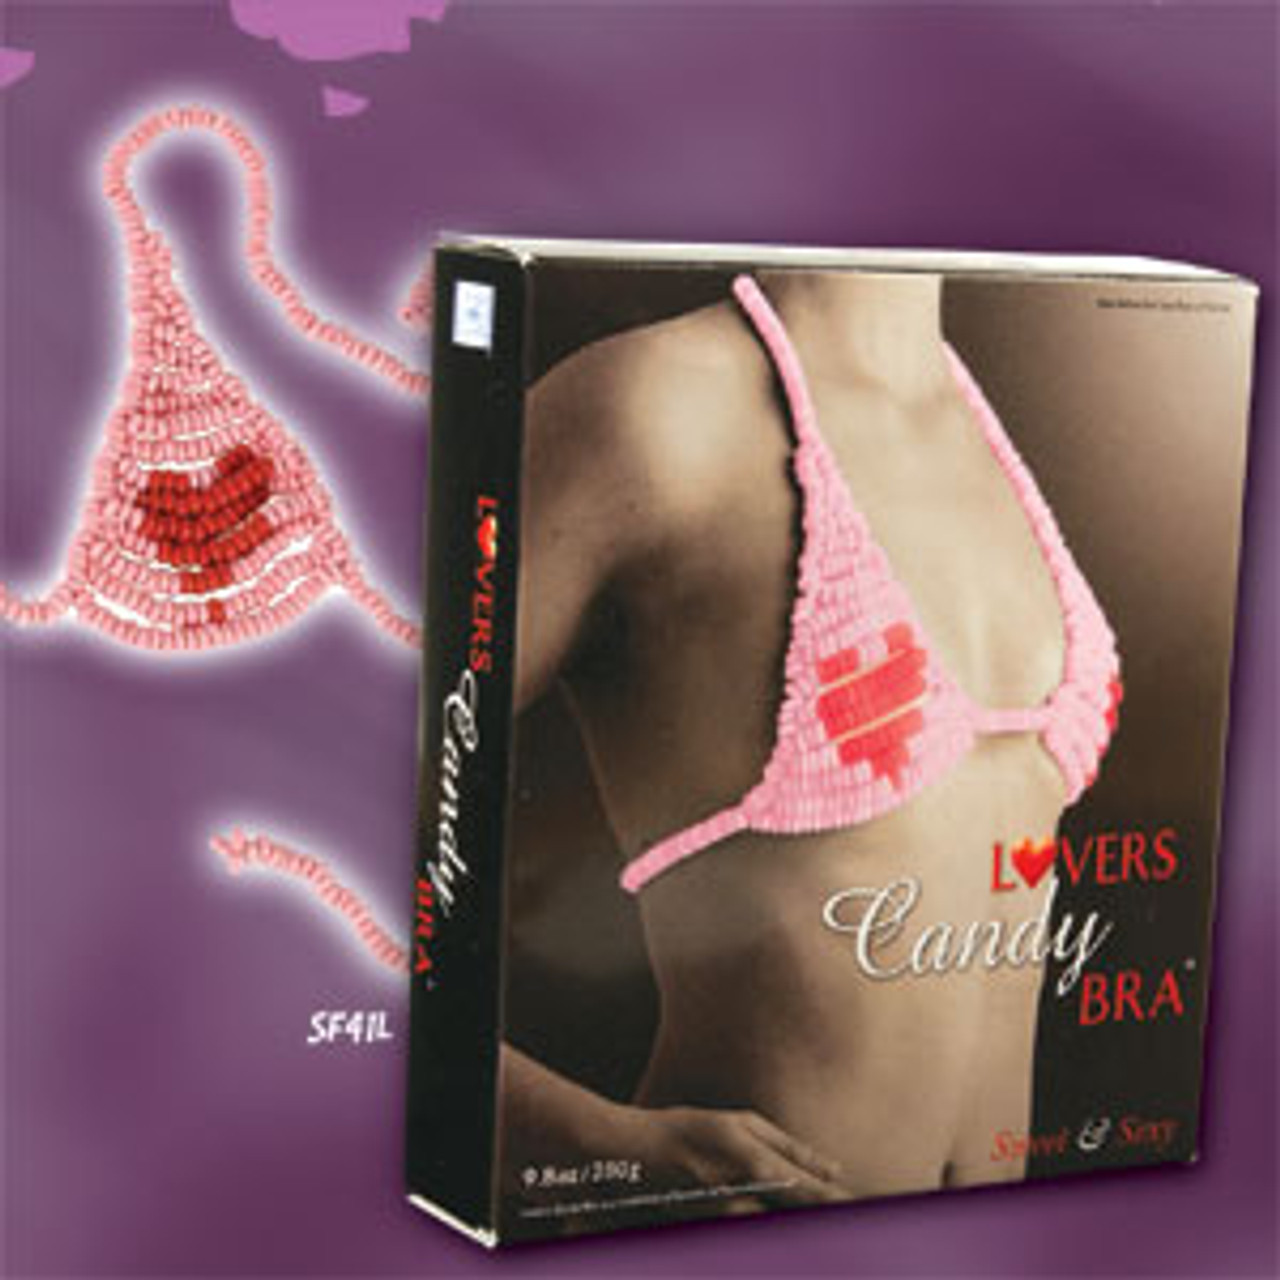 Lovers Candy Bra - Candy Favorites